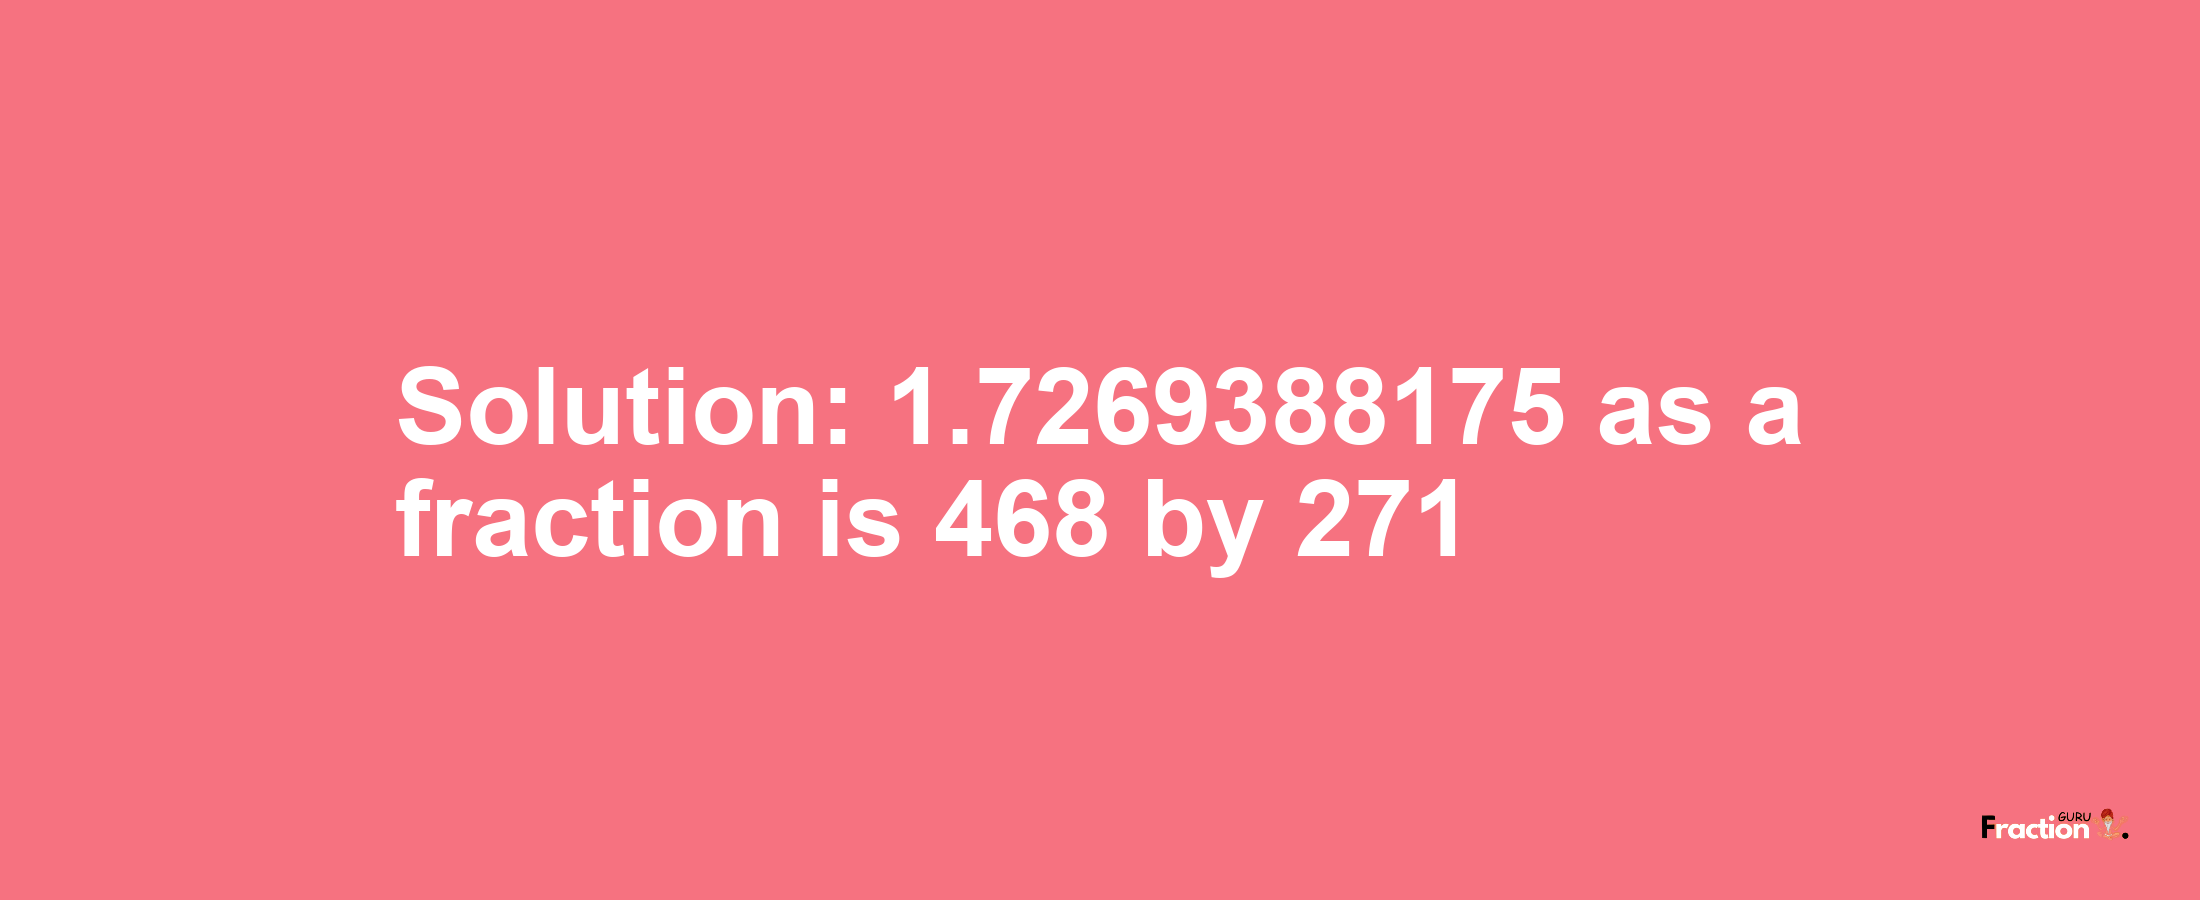 Solution:1.7269388175 as a fraction is 468/271